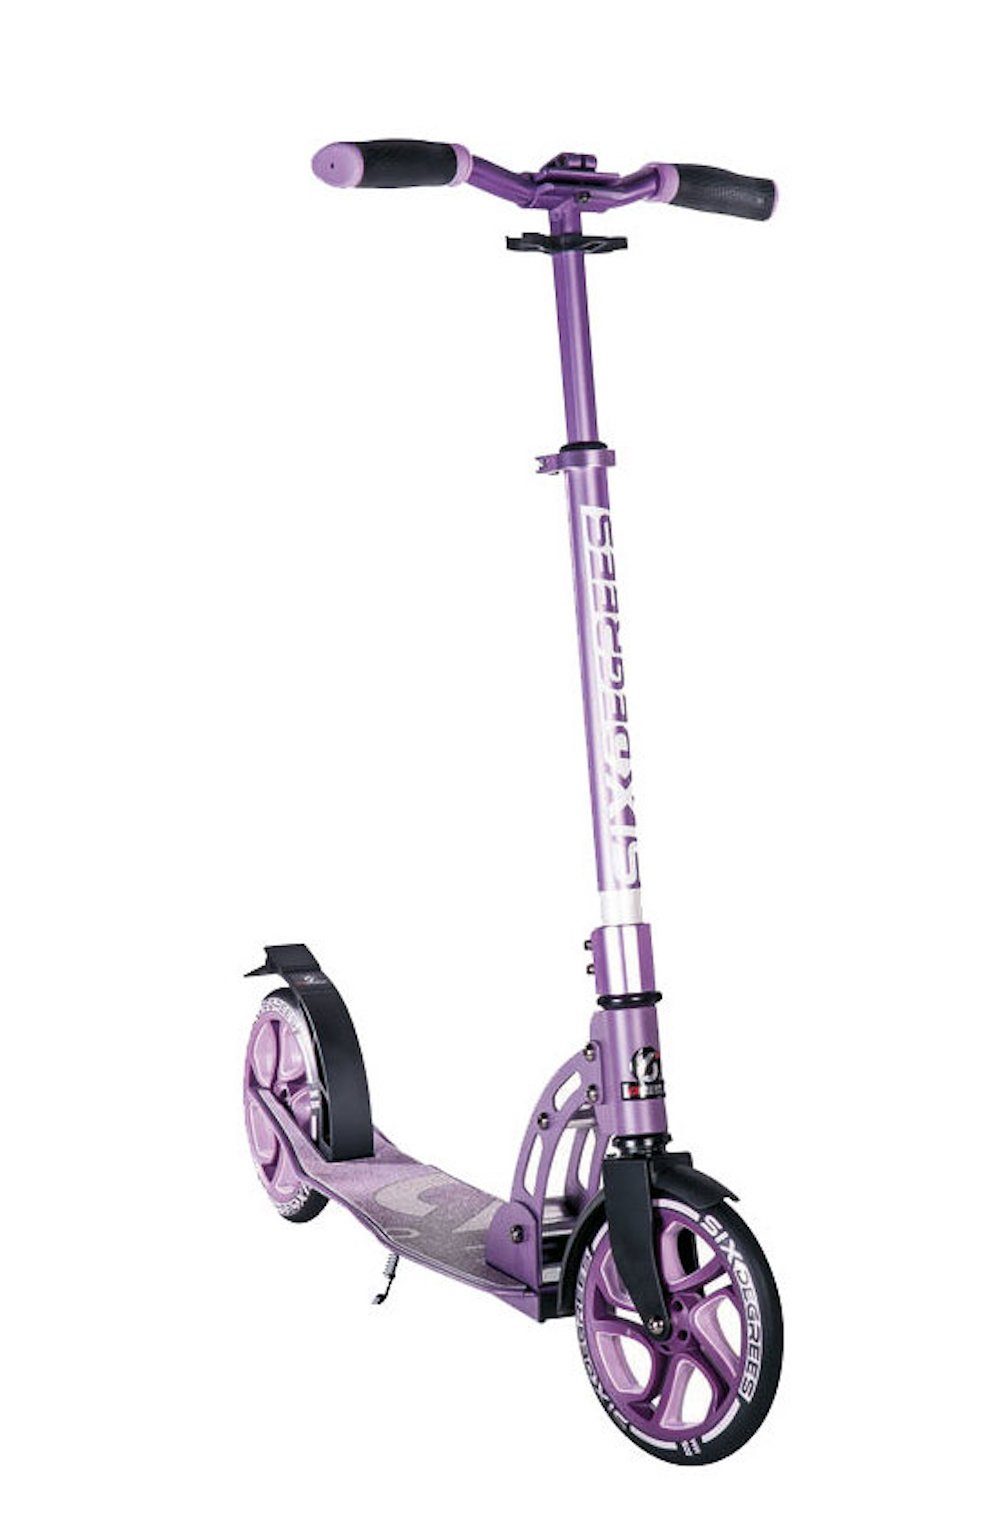 toys Scooter authentic 205mm & sports Lila Aluminium Laufrad, Six-Degrees